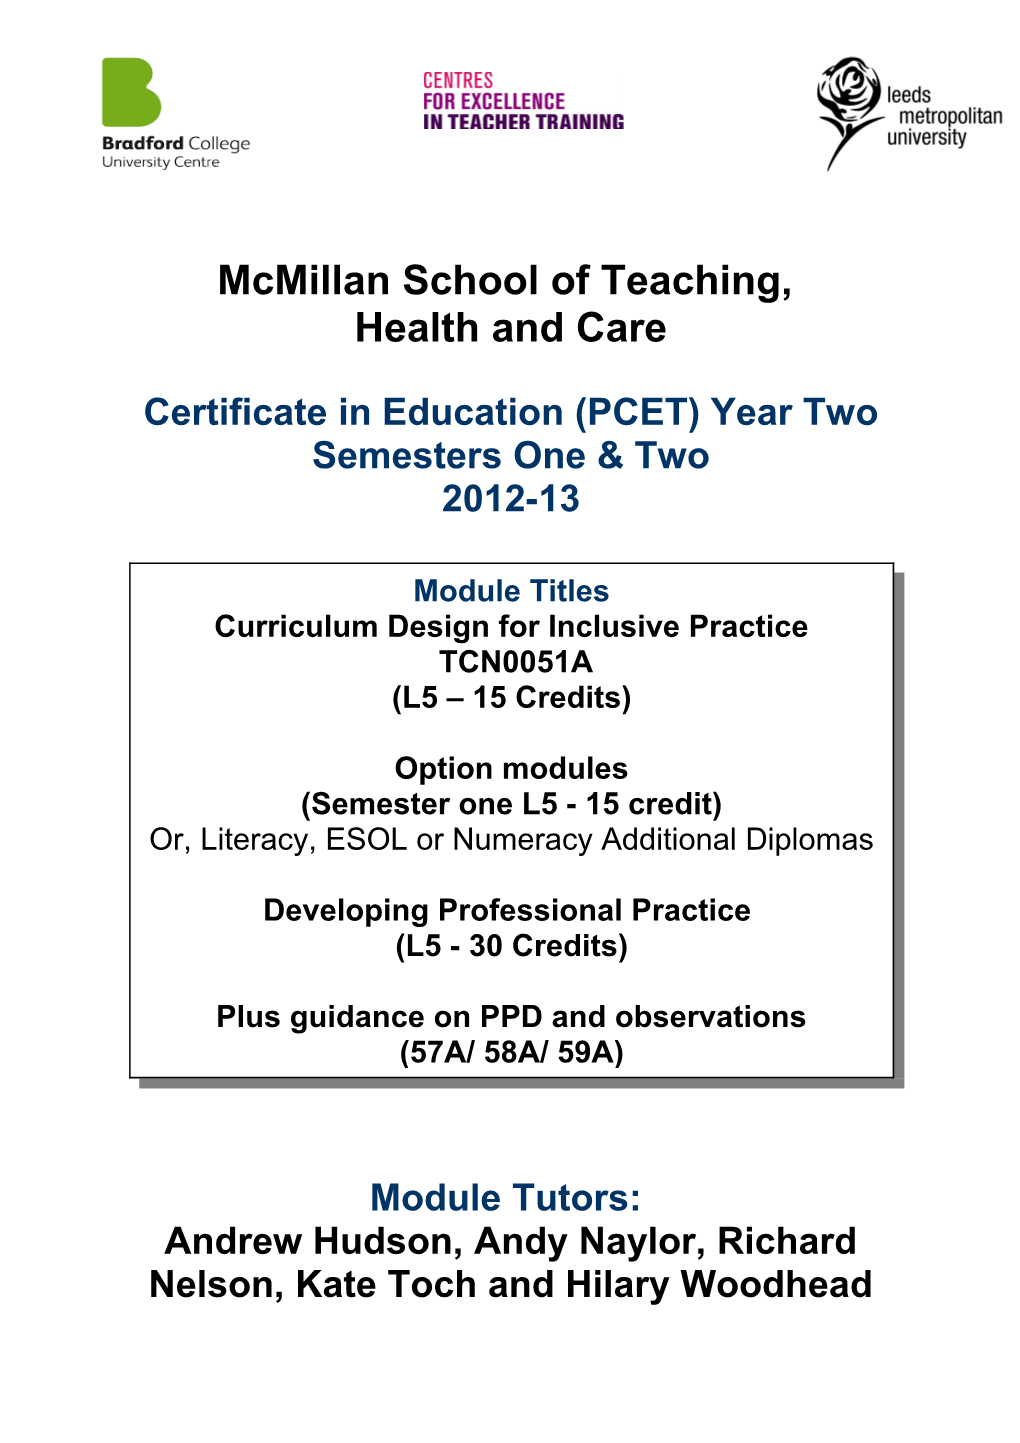 Certificate in Education (PCET) Year Two